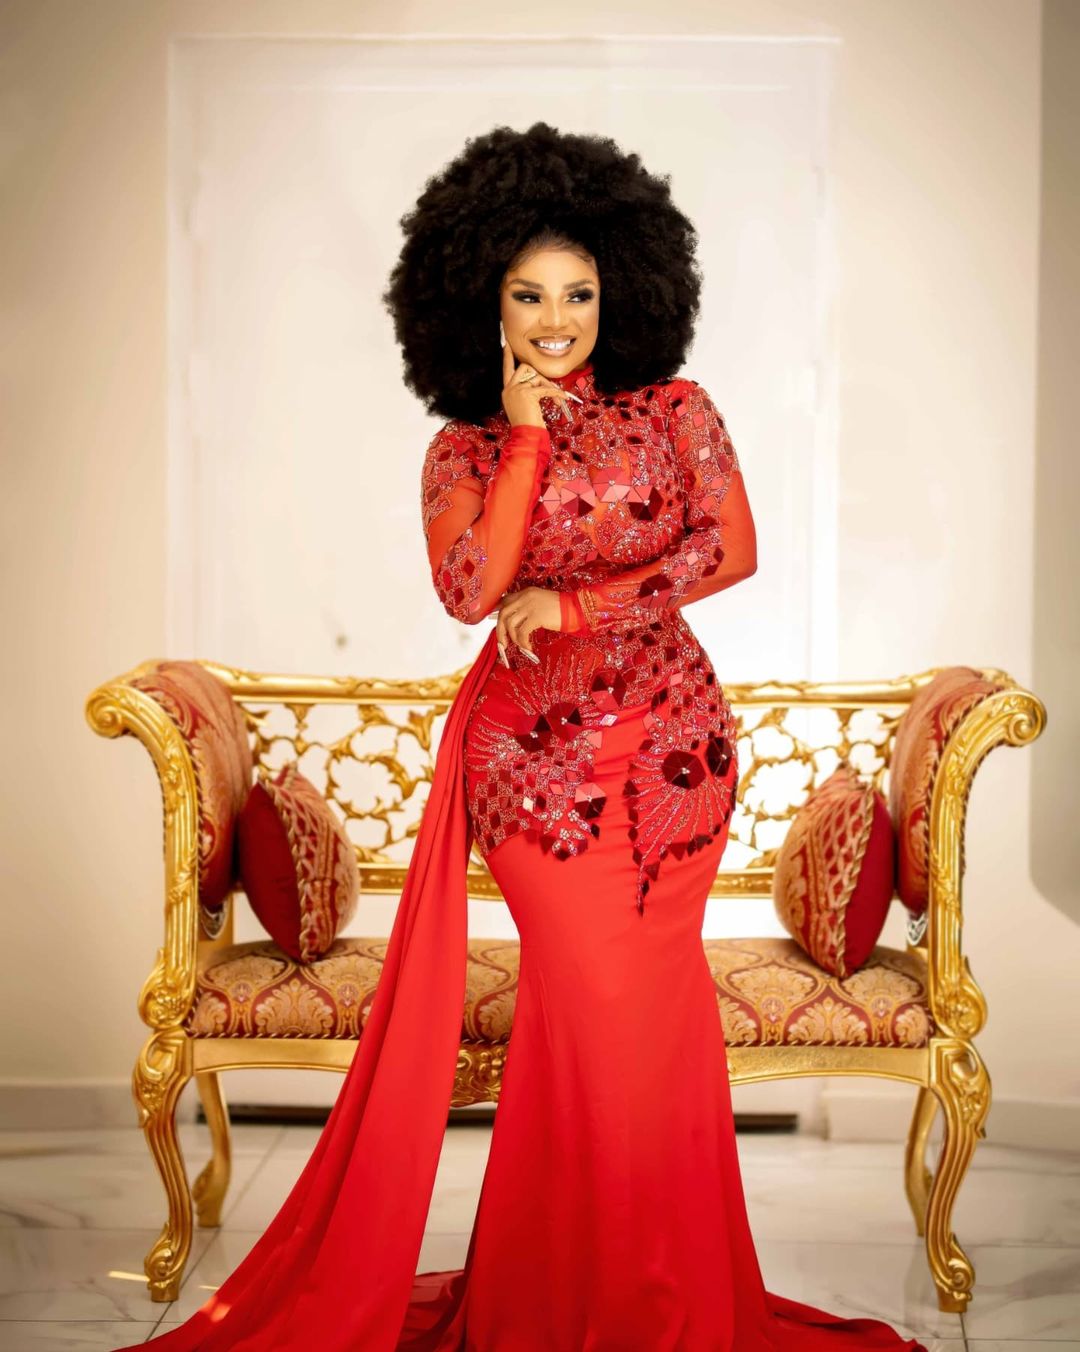 Iyabo Ojo is a Sight to Behold in these Lovely Snaps | BellaNaija